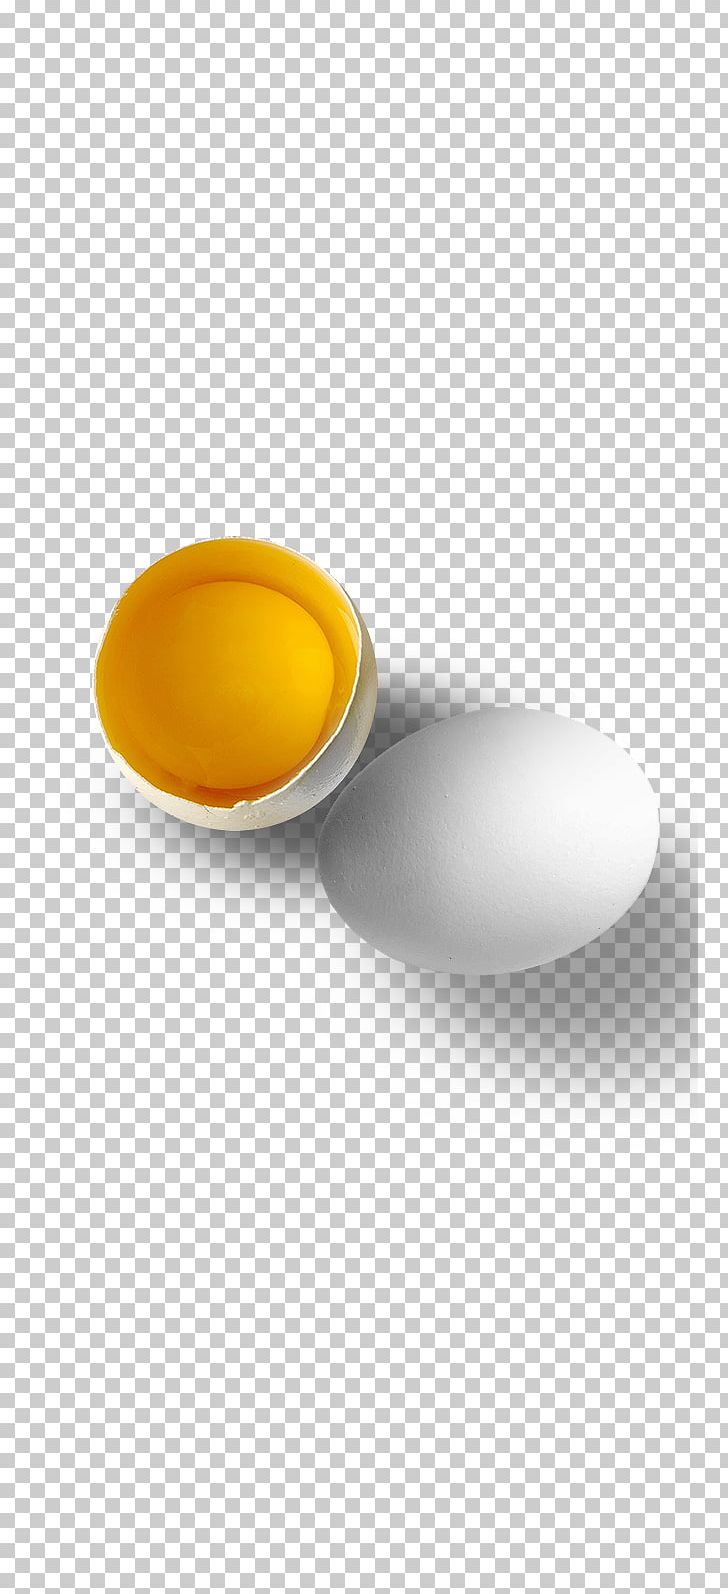 Smash The Eggs! Chicken Egg PNG, Clipart, Broken, Broken Glass, Broken Heart, Broken Wall, Chicken Egg Free PNG Download